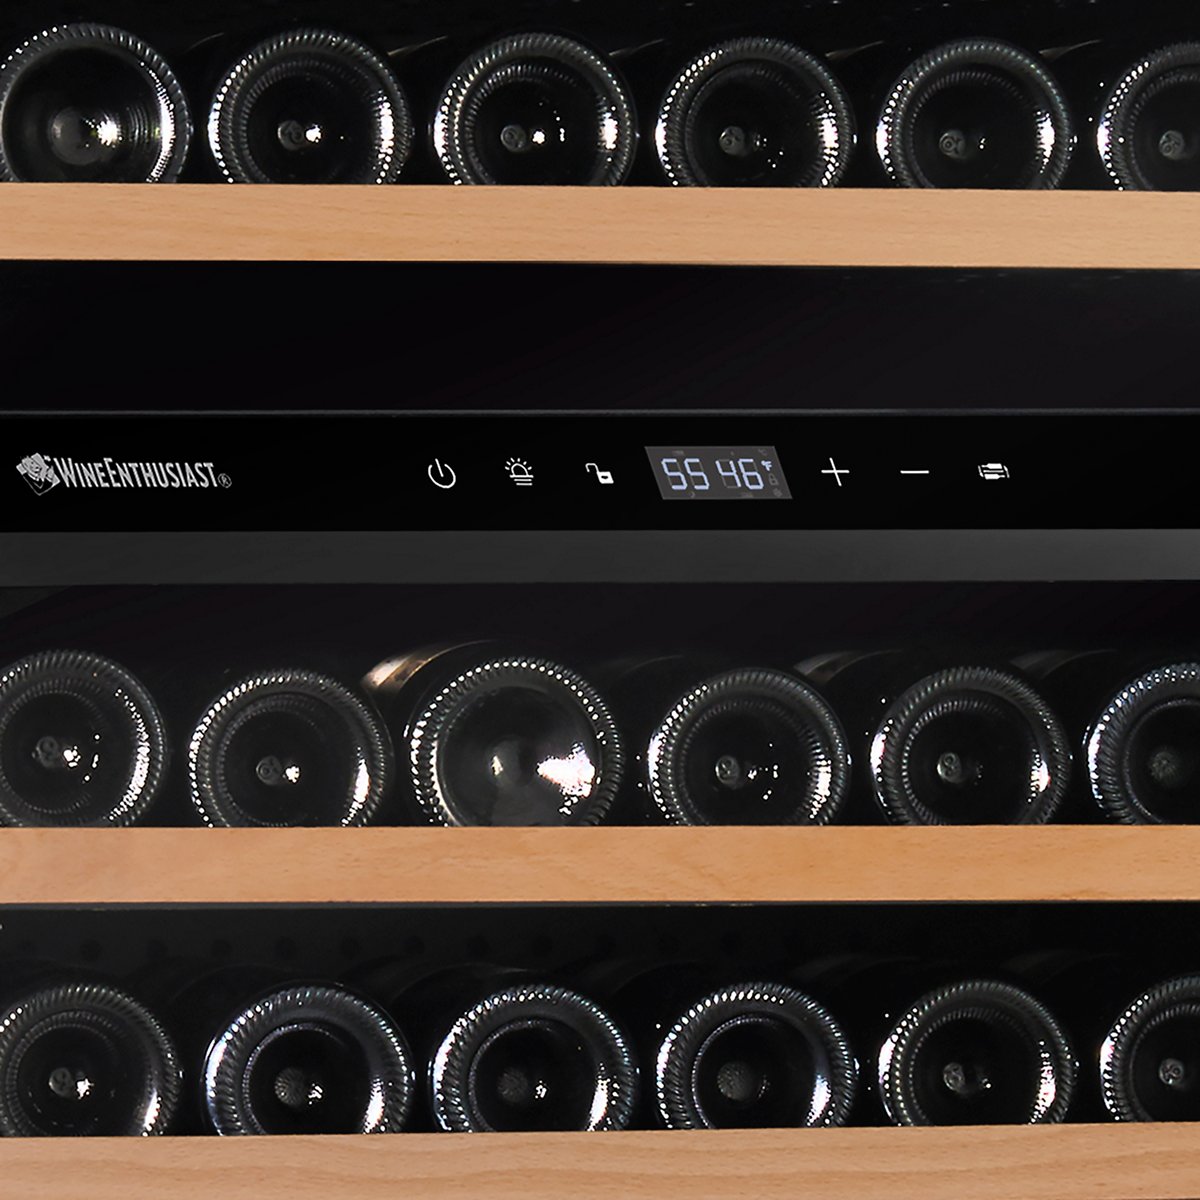 N'FINITY Double LXi Single Zone + LX Dual Zone Max Wine Cellar (Stainless Steel Door)